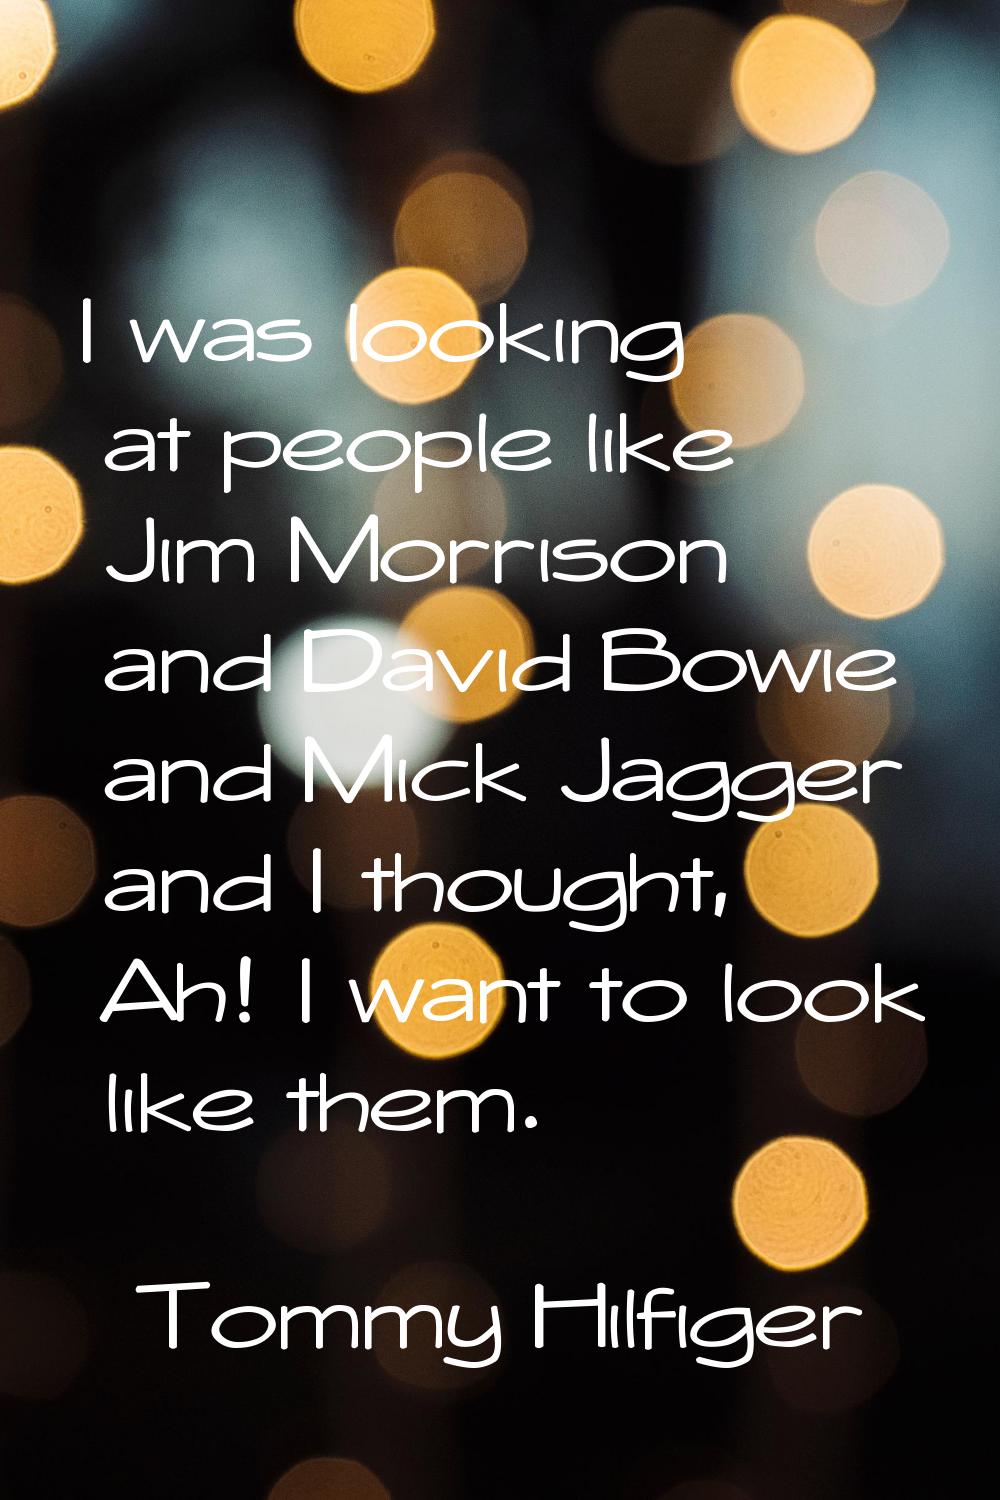 I was looking at people like Jim Morrison and David Bowie and Mick Jagger and I thought, Ah! I want